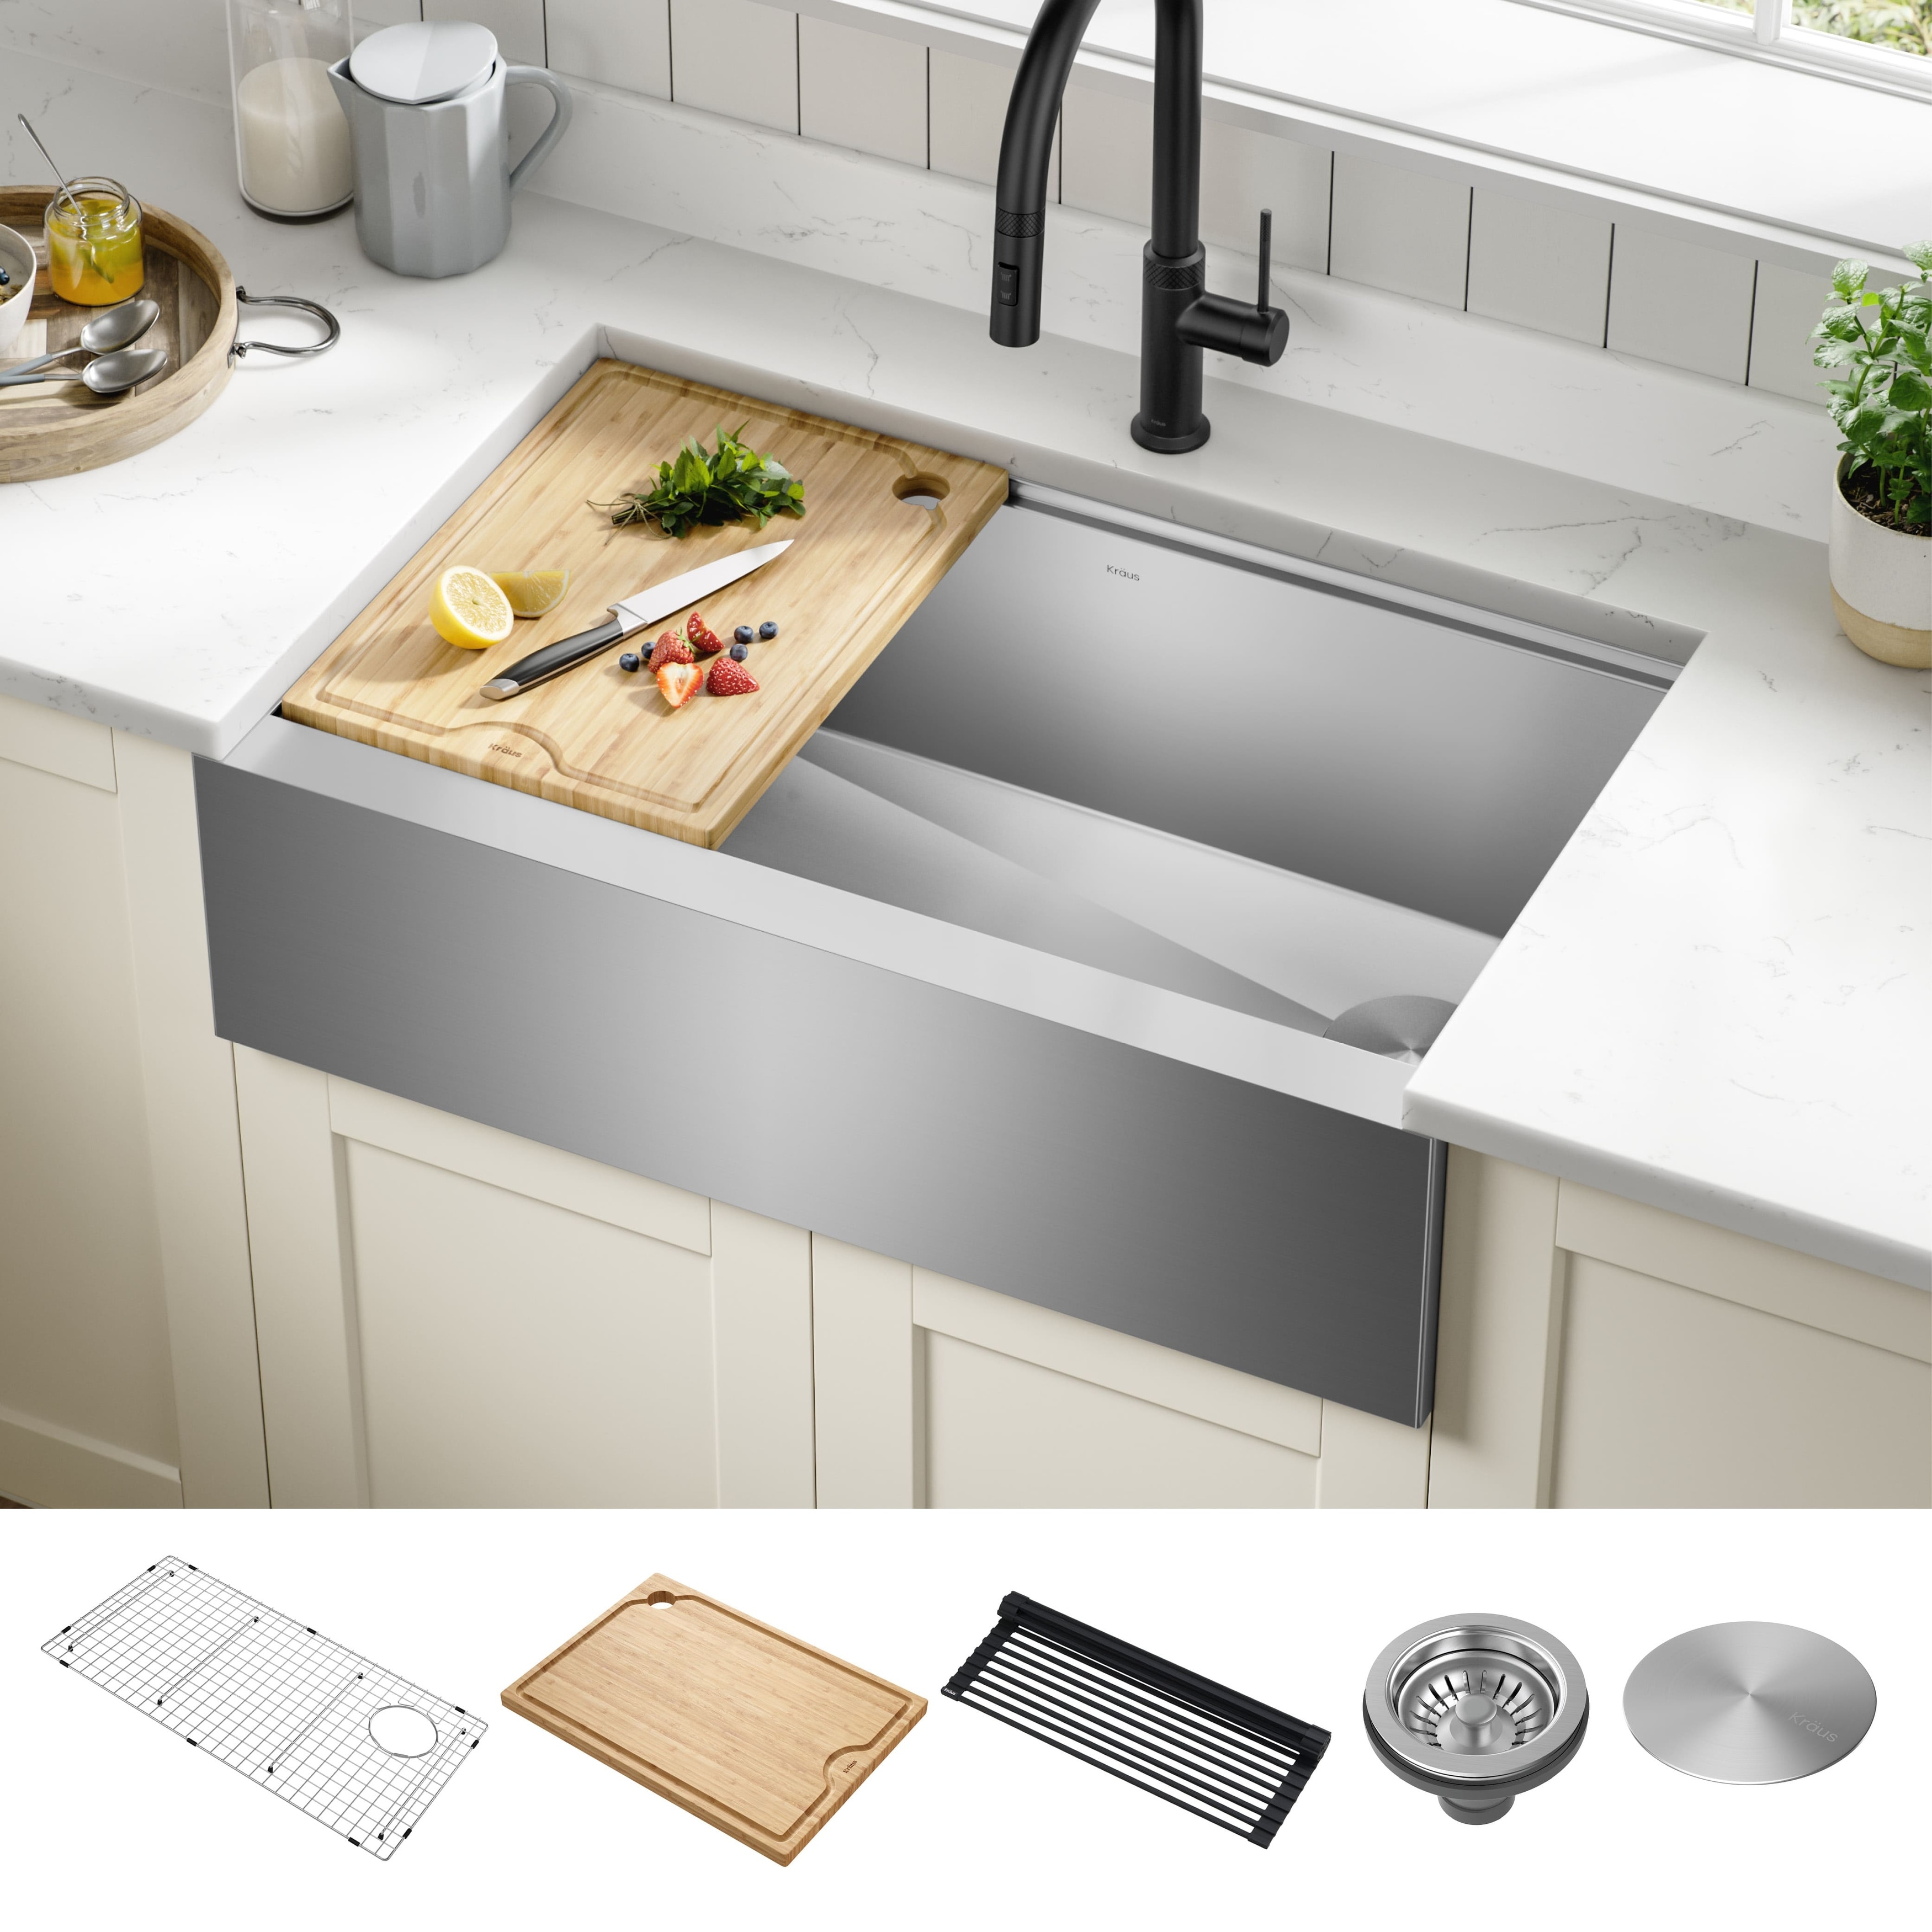 https://ak1.ostkcdn.com/images/products/is/images/direct/66169fd3e6f4a83ebc817fde1b403ce3a30384b5/KRAUS-Kore-Stainless-Steel-Farmhouse-Kitchen-Sink-with-Accessories.jpg